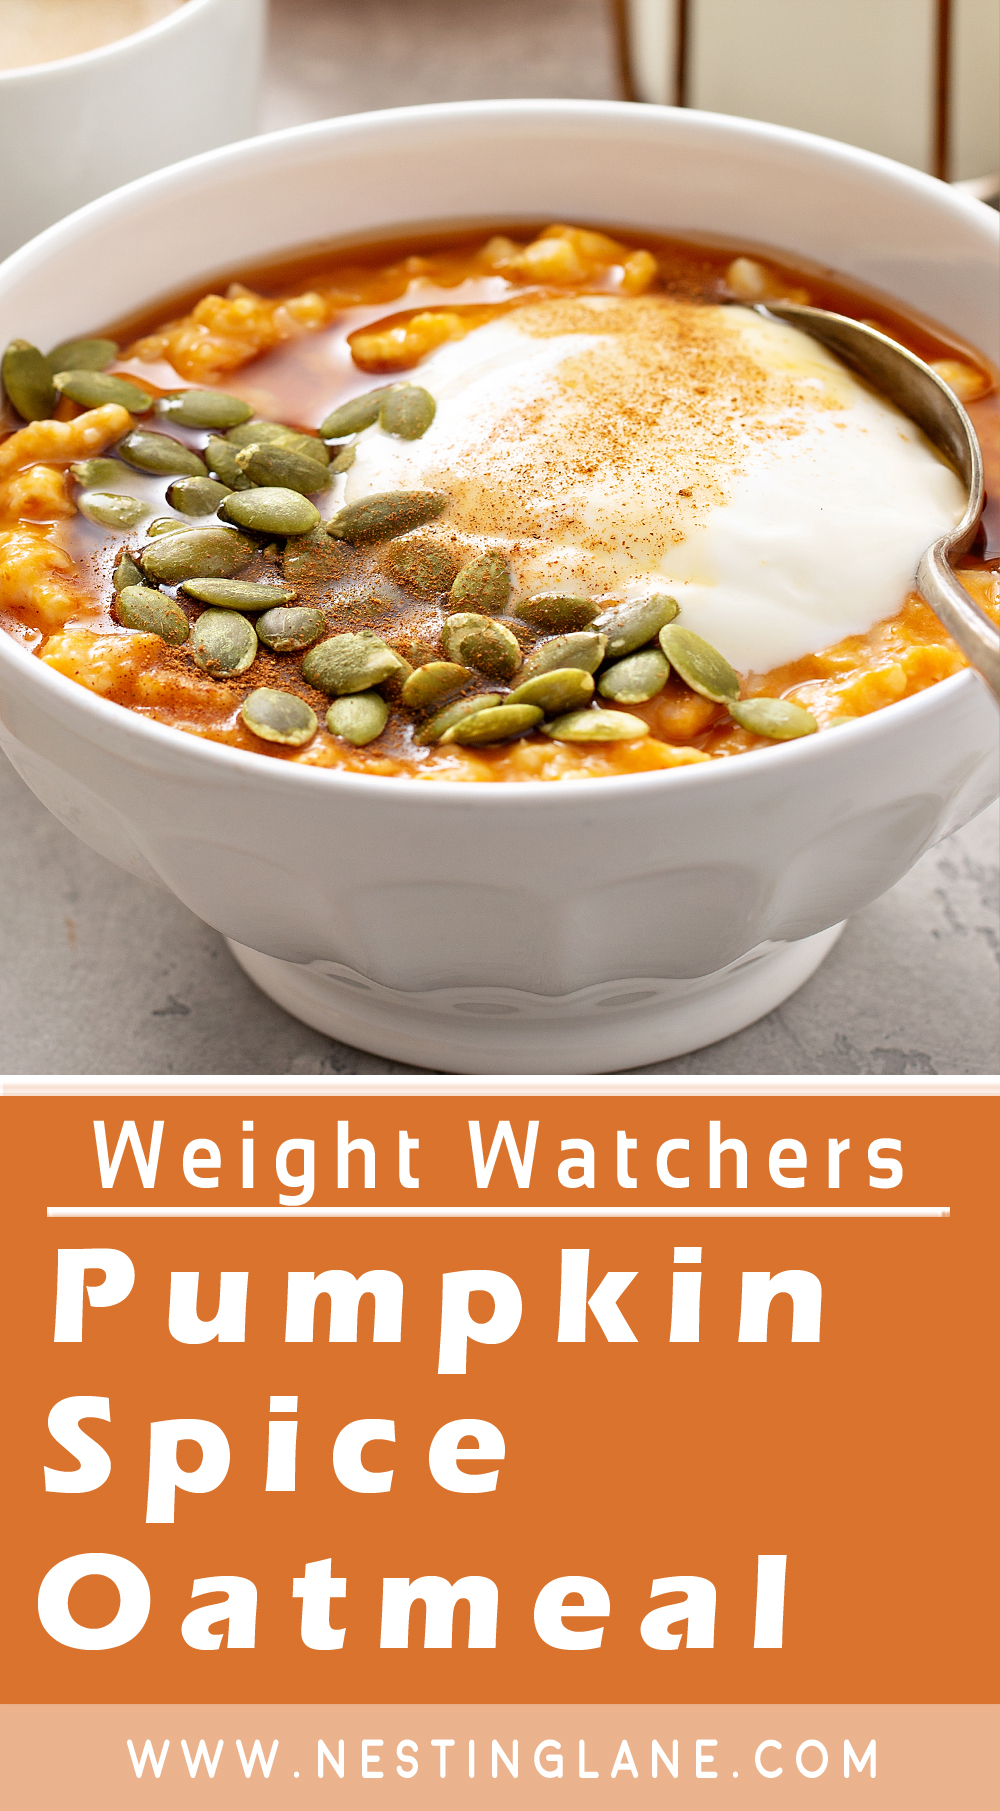 Graphic for Pinterest of Weight Watchers Slow Cooker Pumpkin Spice Oatmeal